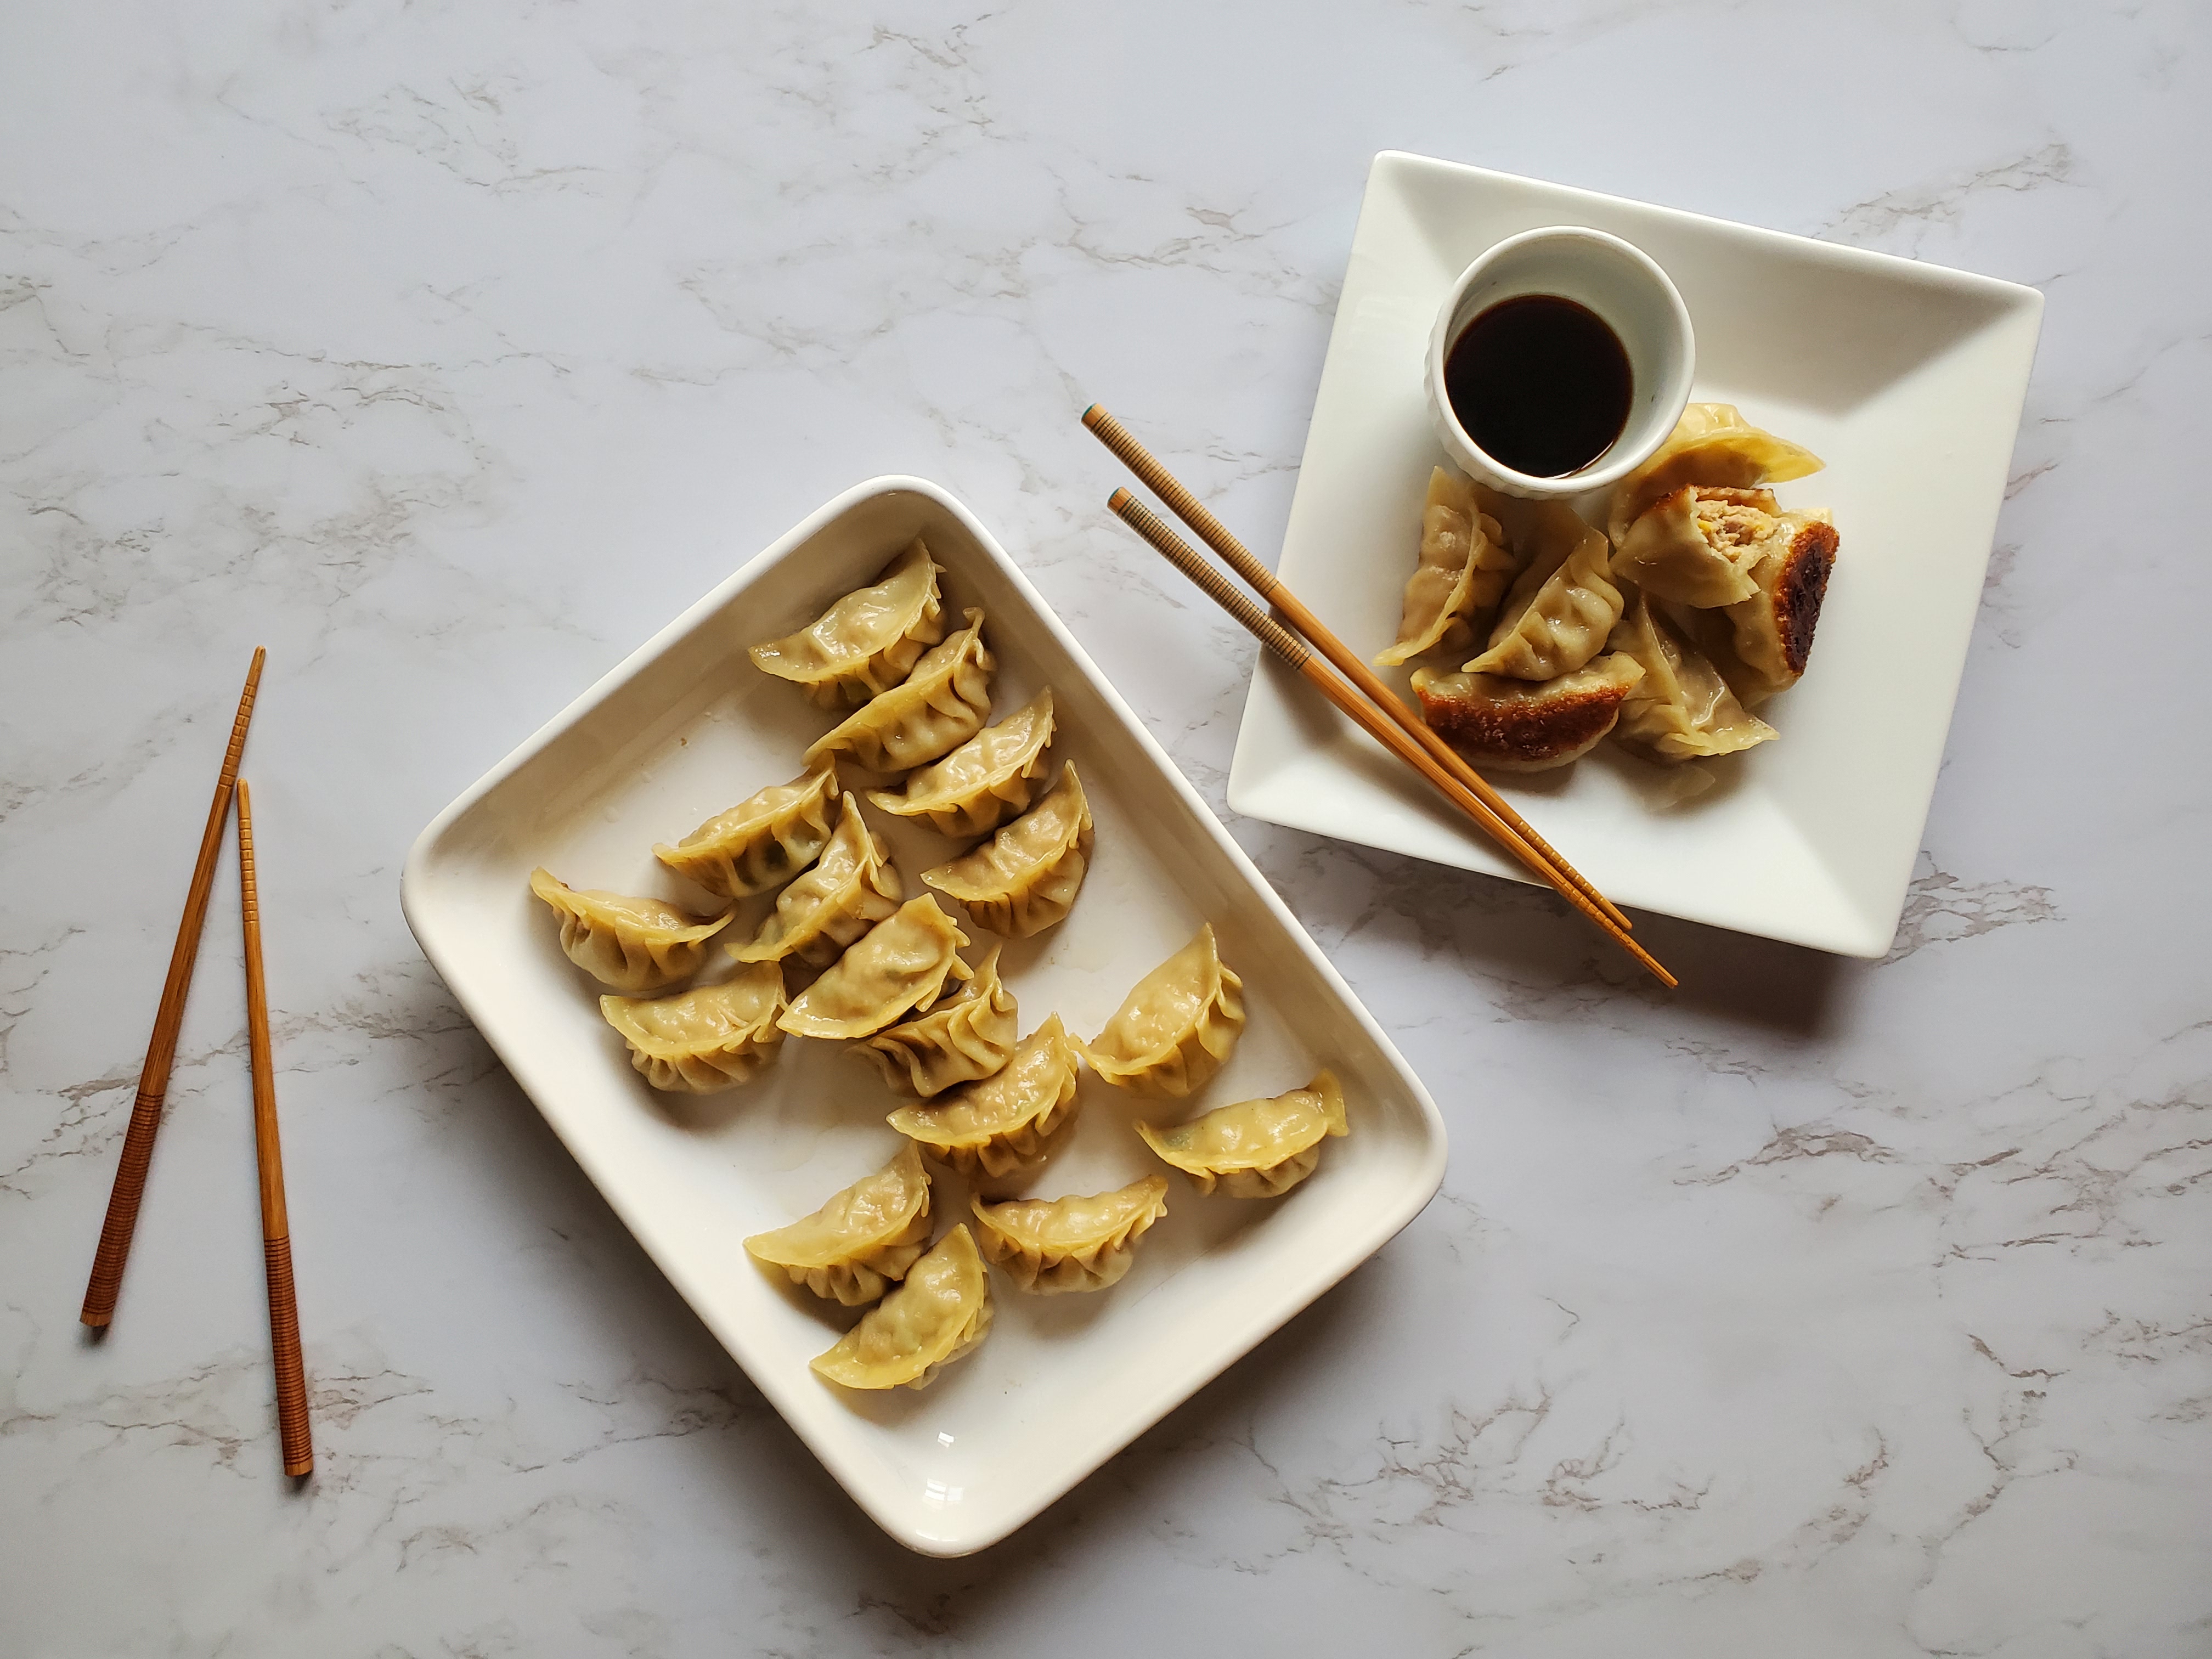 A large rectangular plater of Chinese Potstickers sits next to a square plate of potstickers with a small bowl of dark brown dumpling sauce. A pair of chopsticks rest on the square plate and on the left of the platter on the white marble coutertop.